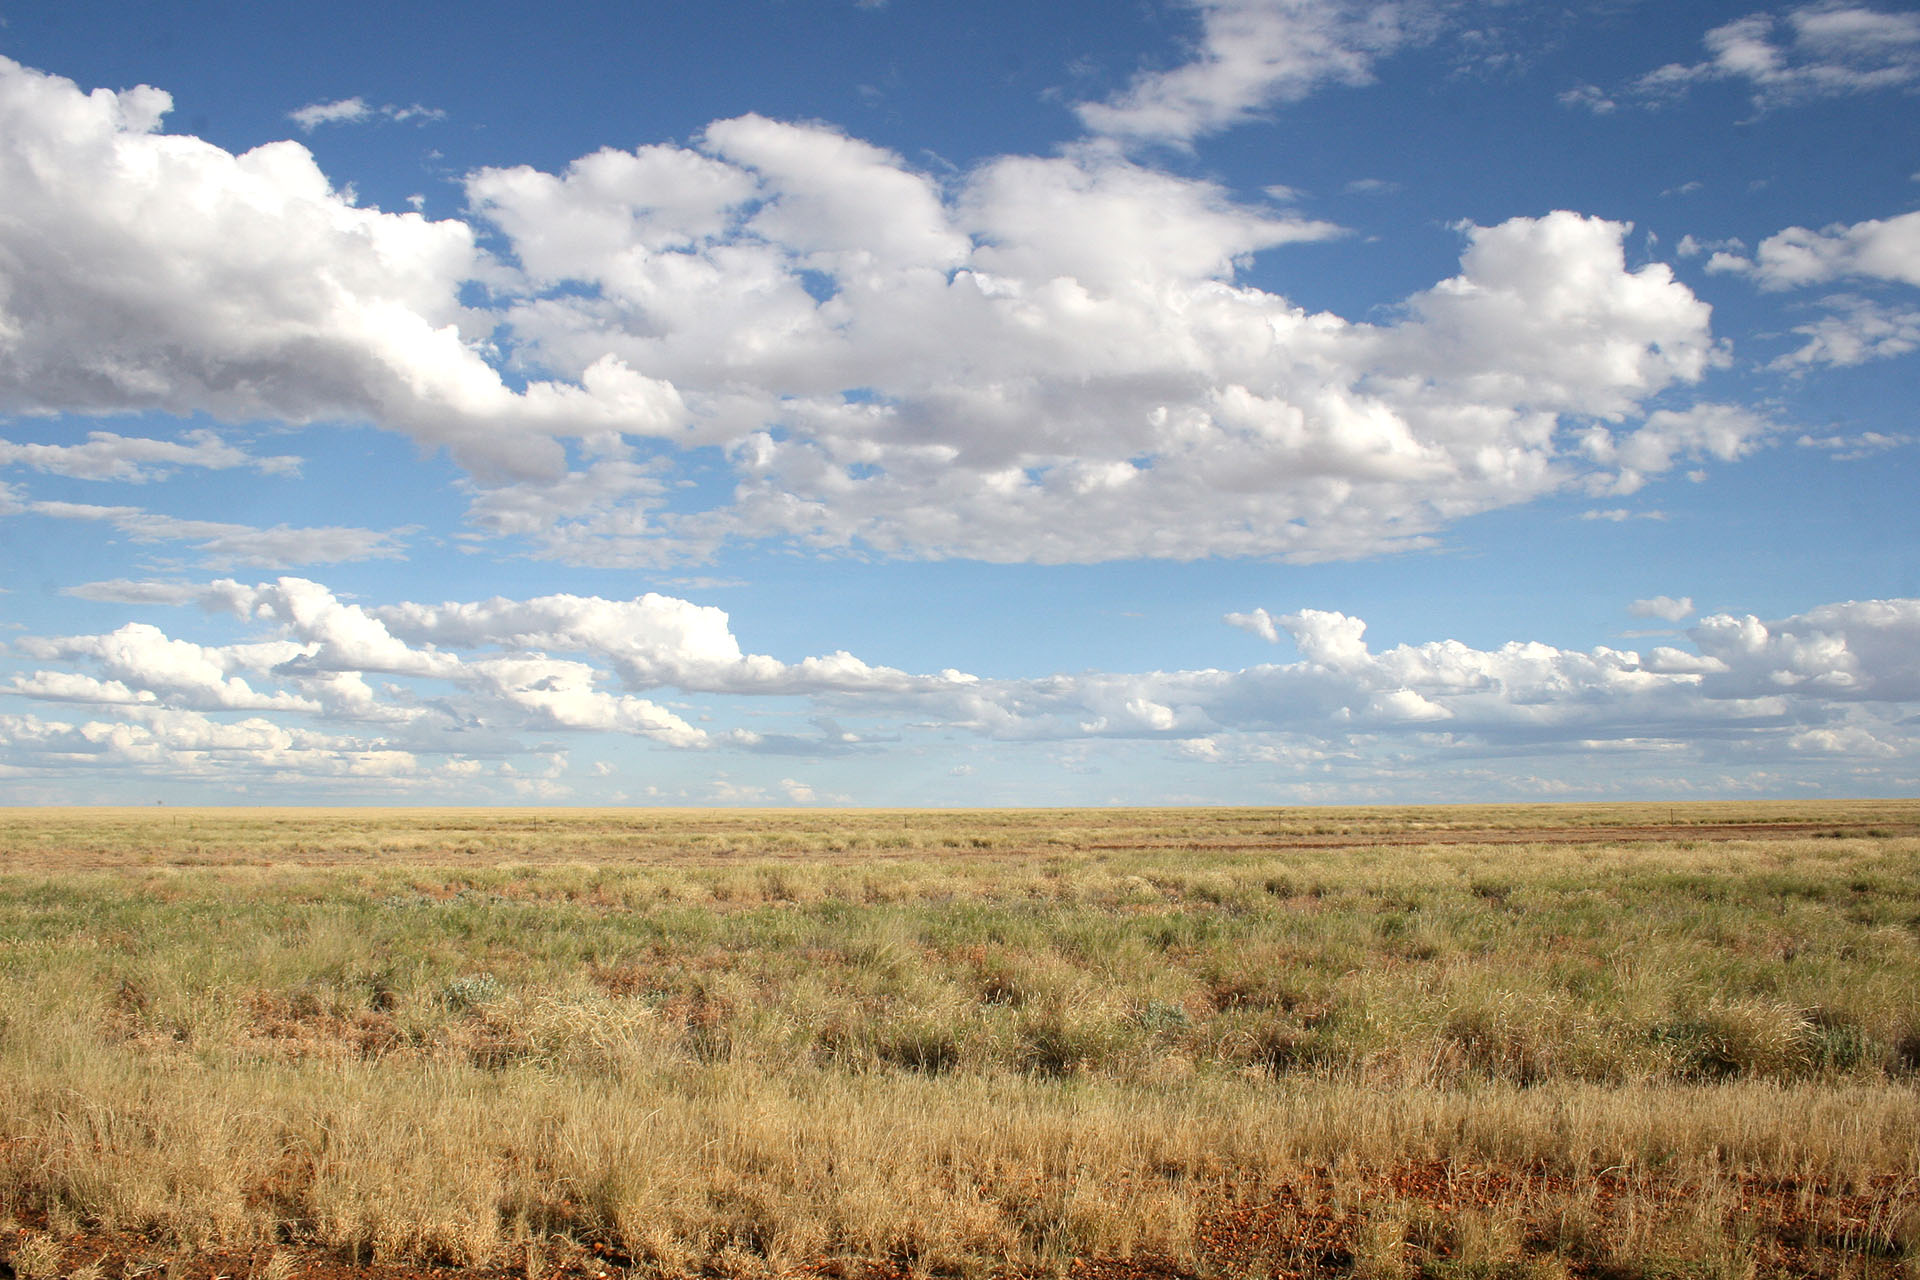 Vast plains of the Barkly Tableland next to the Queensland border.